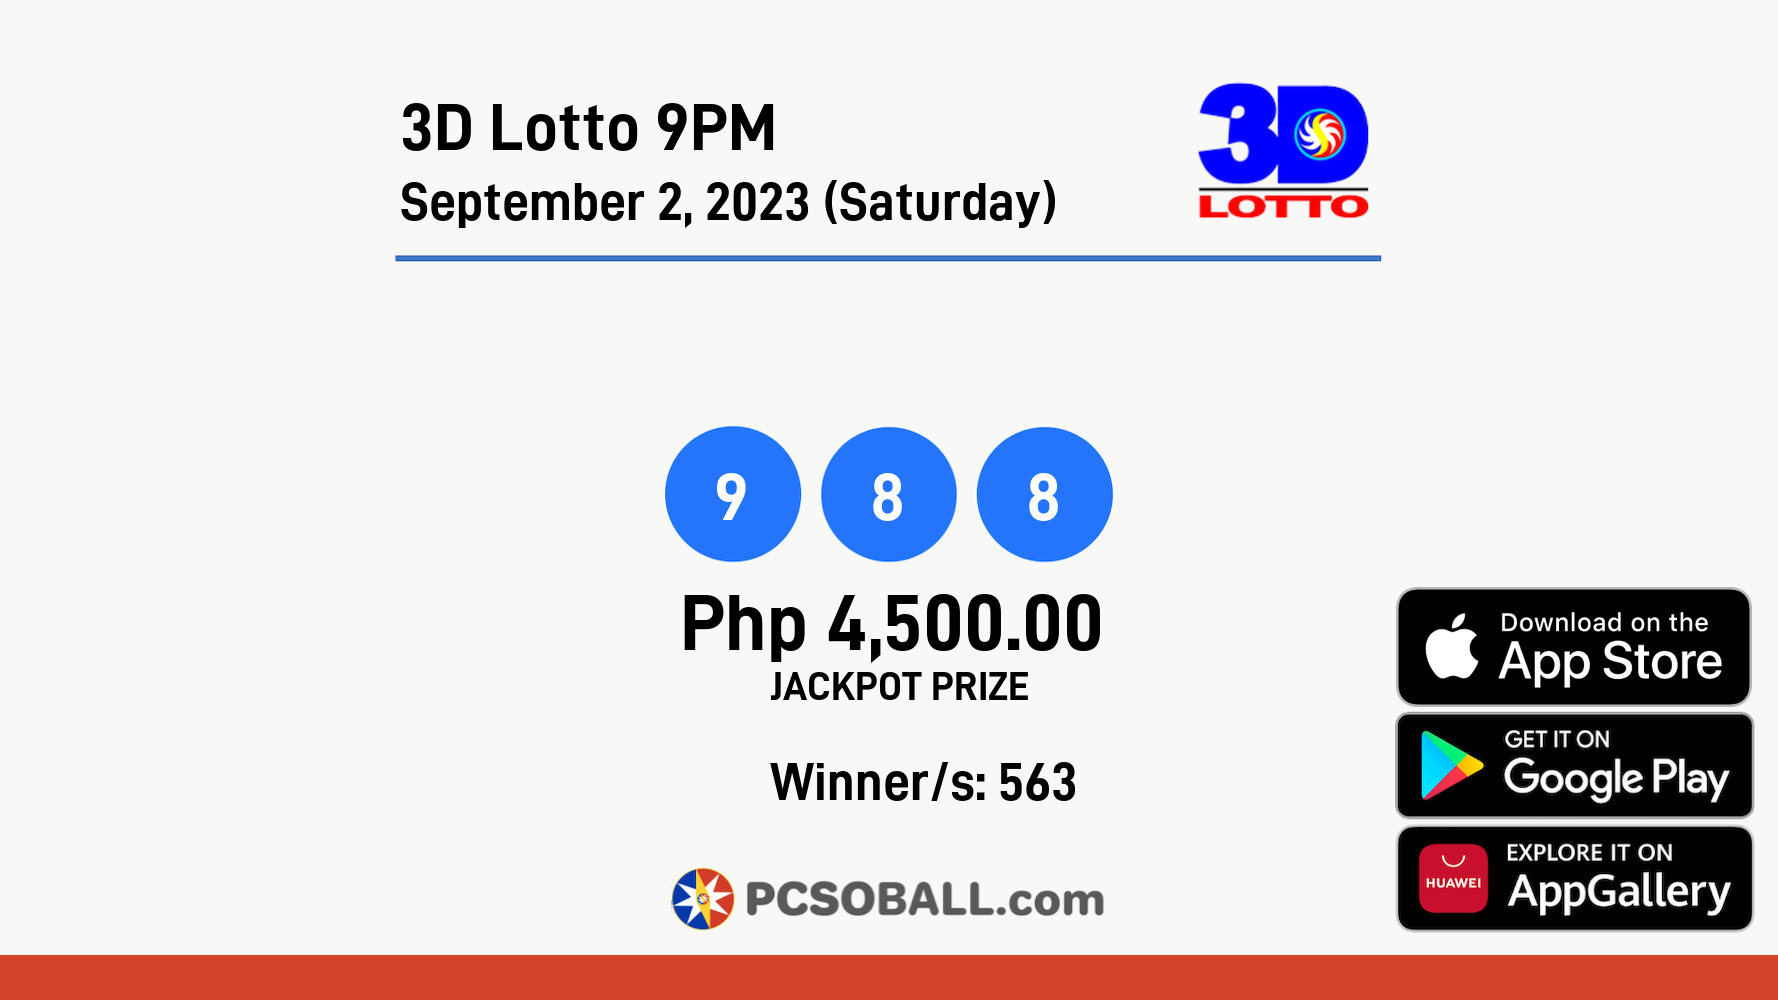 3D Lotto 9PM September 2, 2023 (Saturday) Result